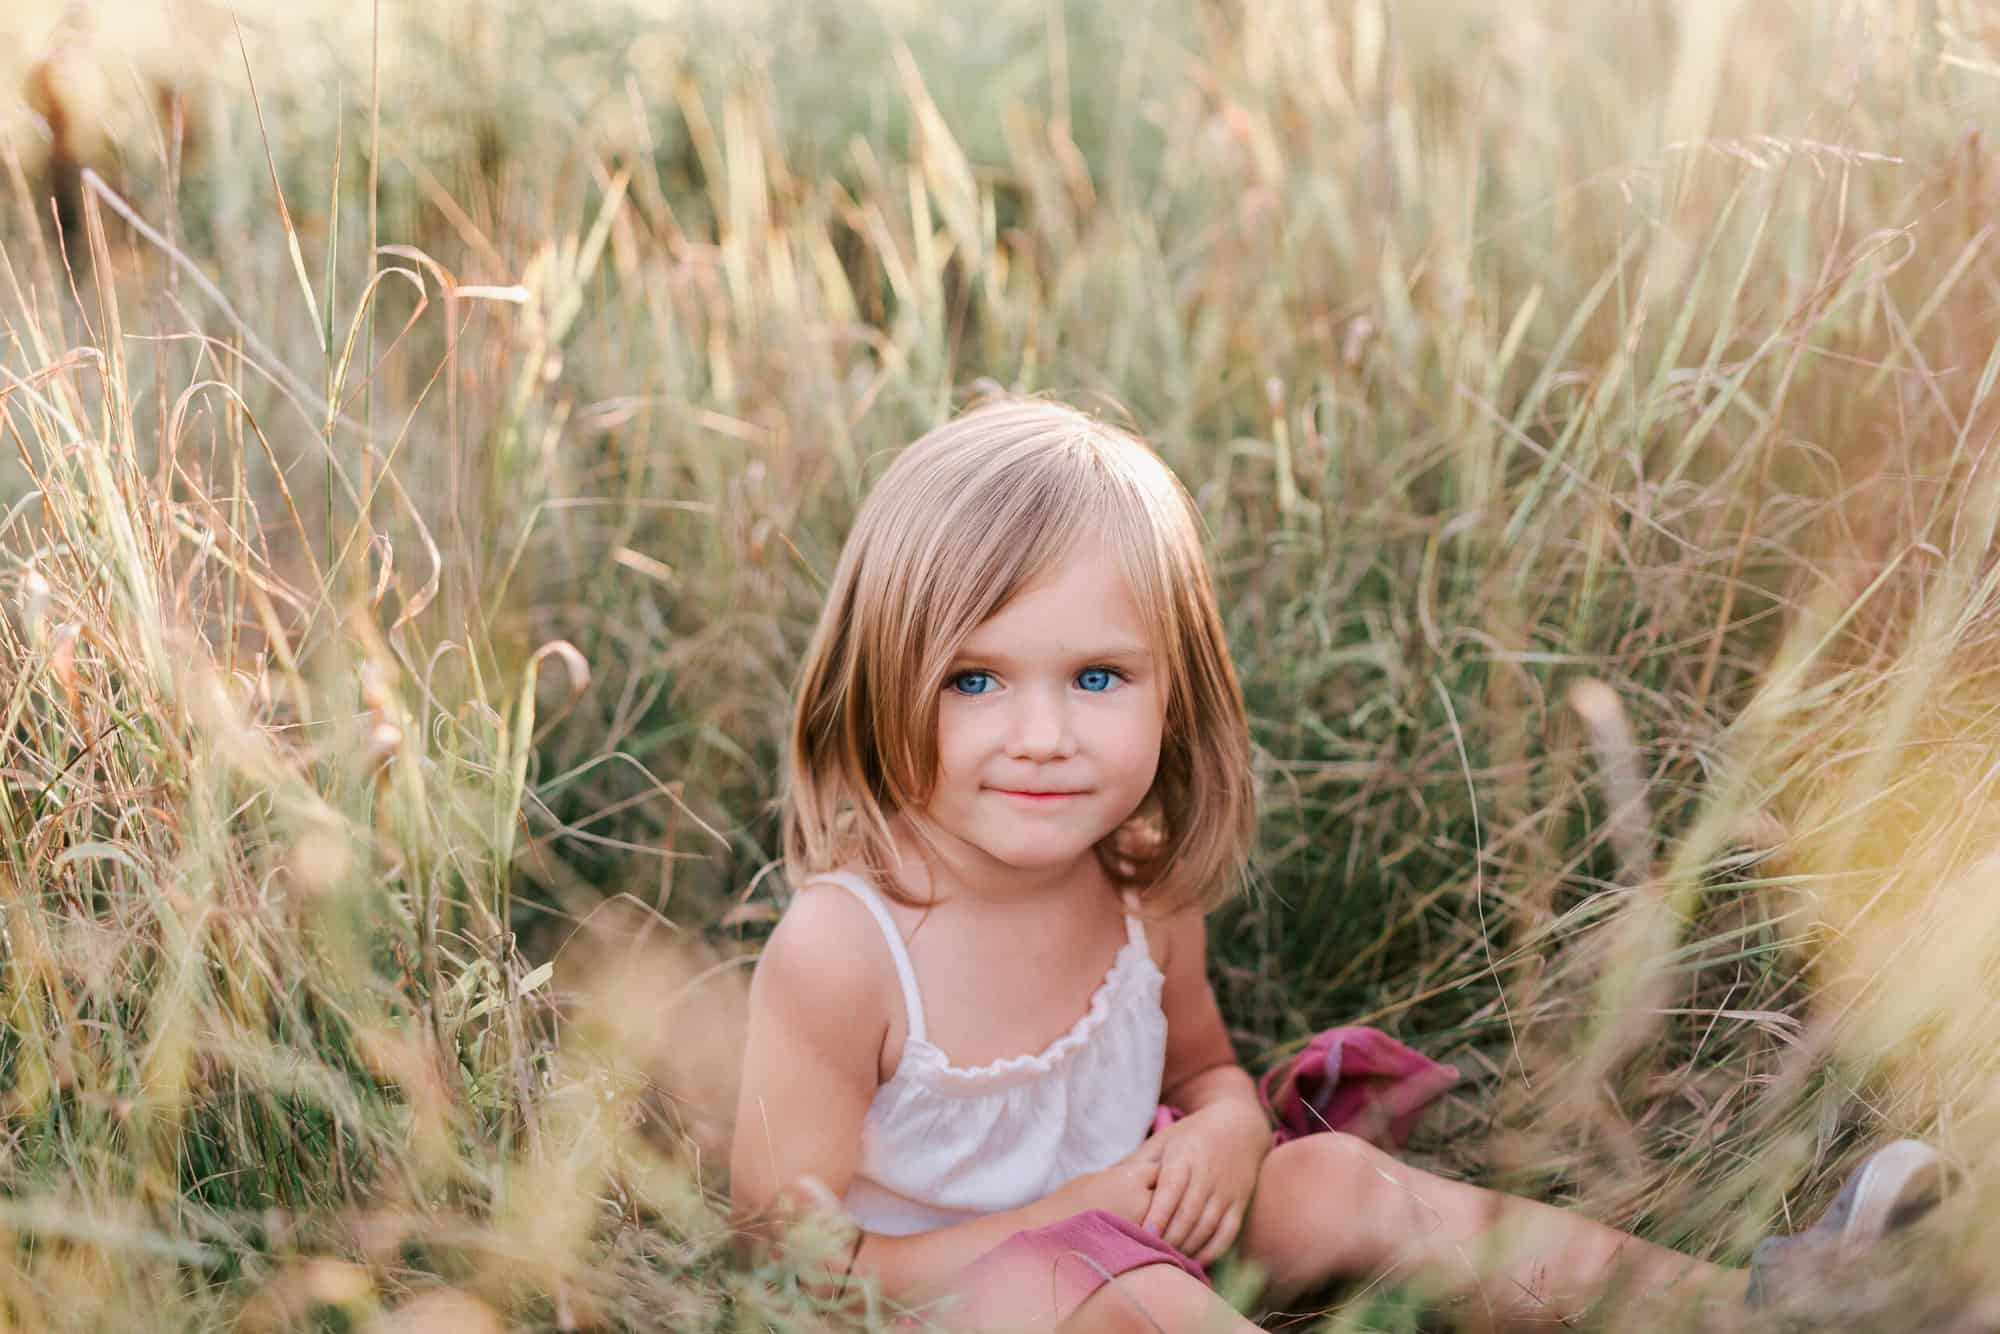 Little girl in a dress sitting in a grassy field from The Sharing Squirrel by Chelsey Kae Photography